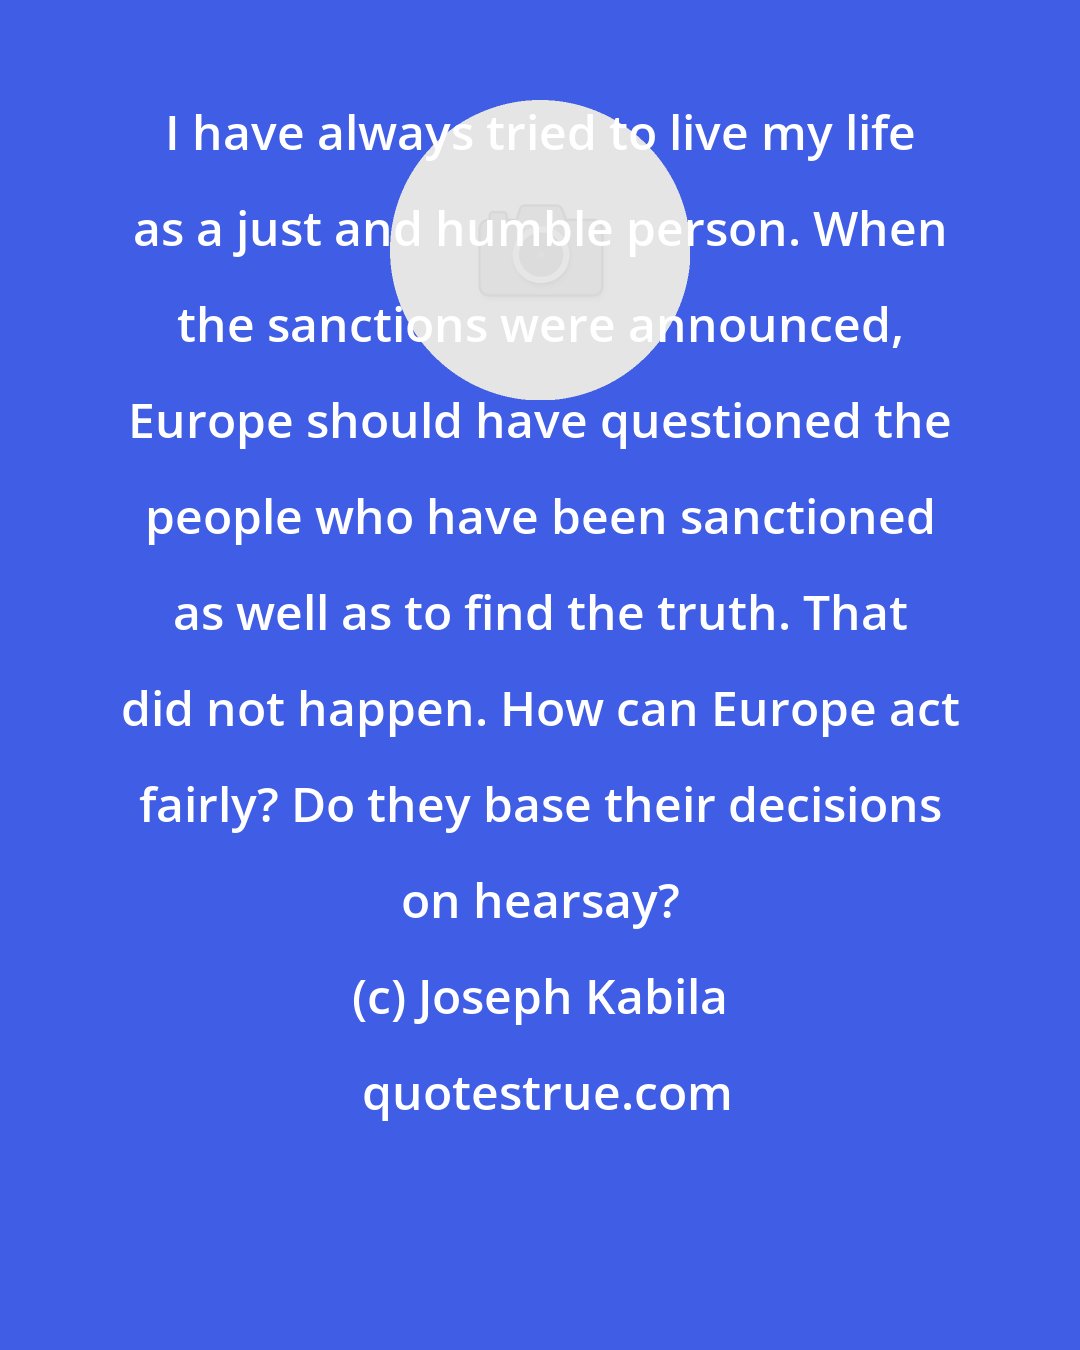 Joseph Kabila: I have always tried to live my life as a just and humble person. When the sanctions were announced, Europe should have questioned the people who have been sanctioned as well as to find the truth. That did not happen. How can Europe act fairly? Do they base their decisions on hearsay?